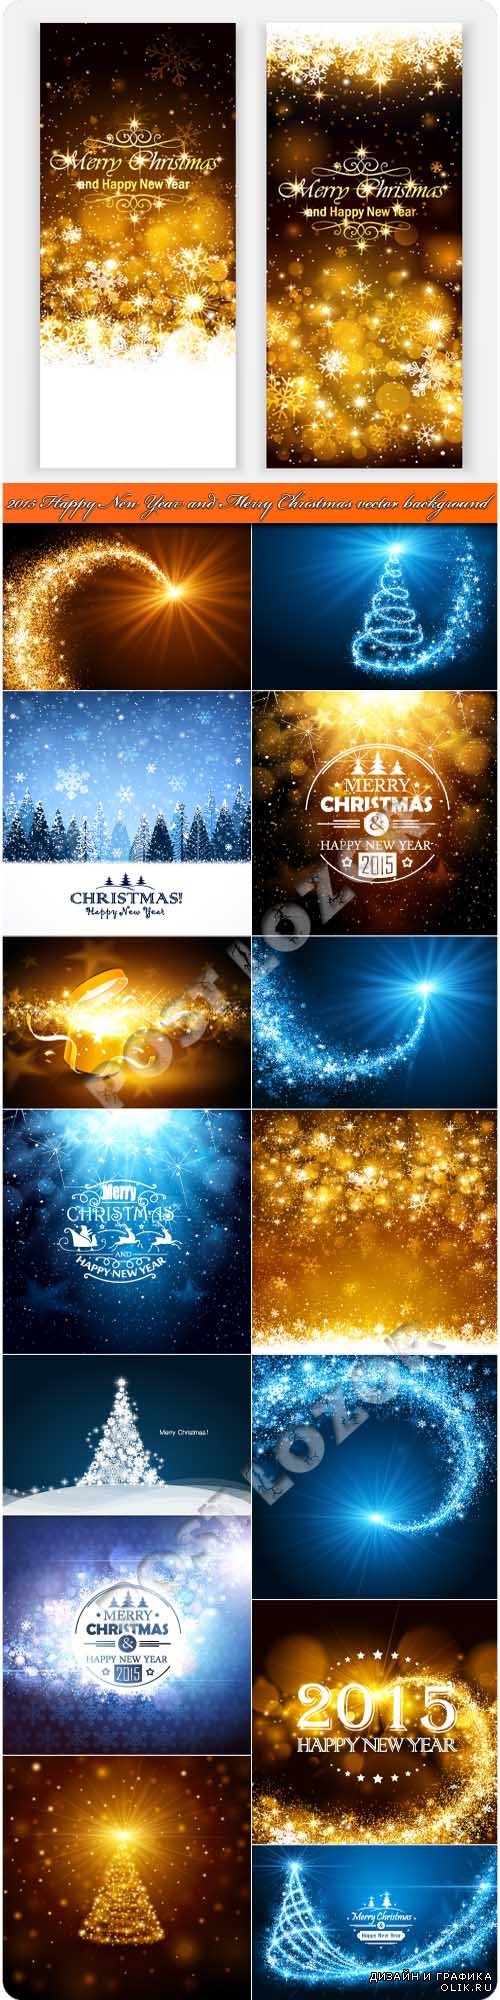 2015 Happy New Year and Merry Christmas vector background